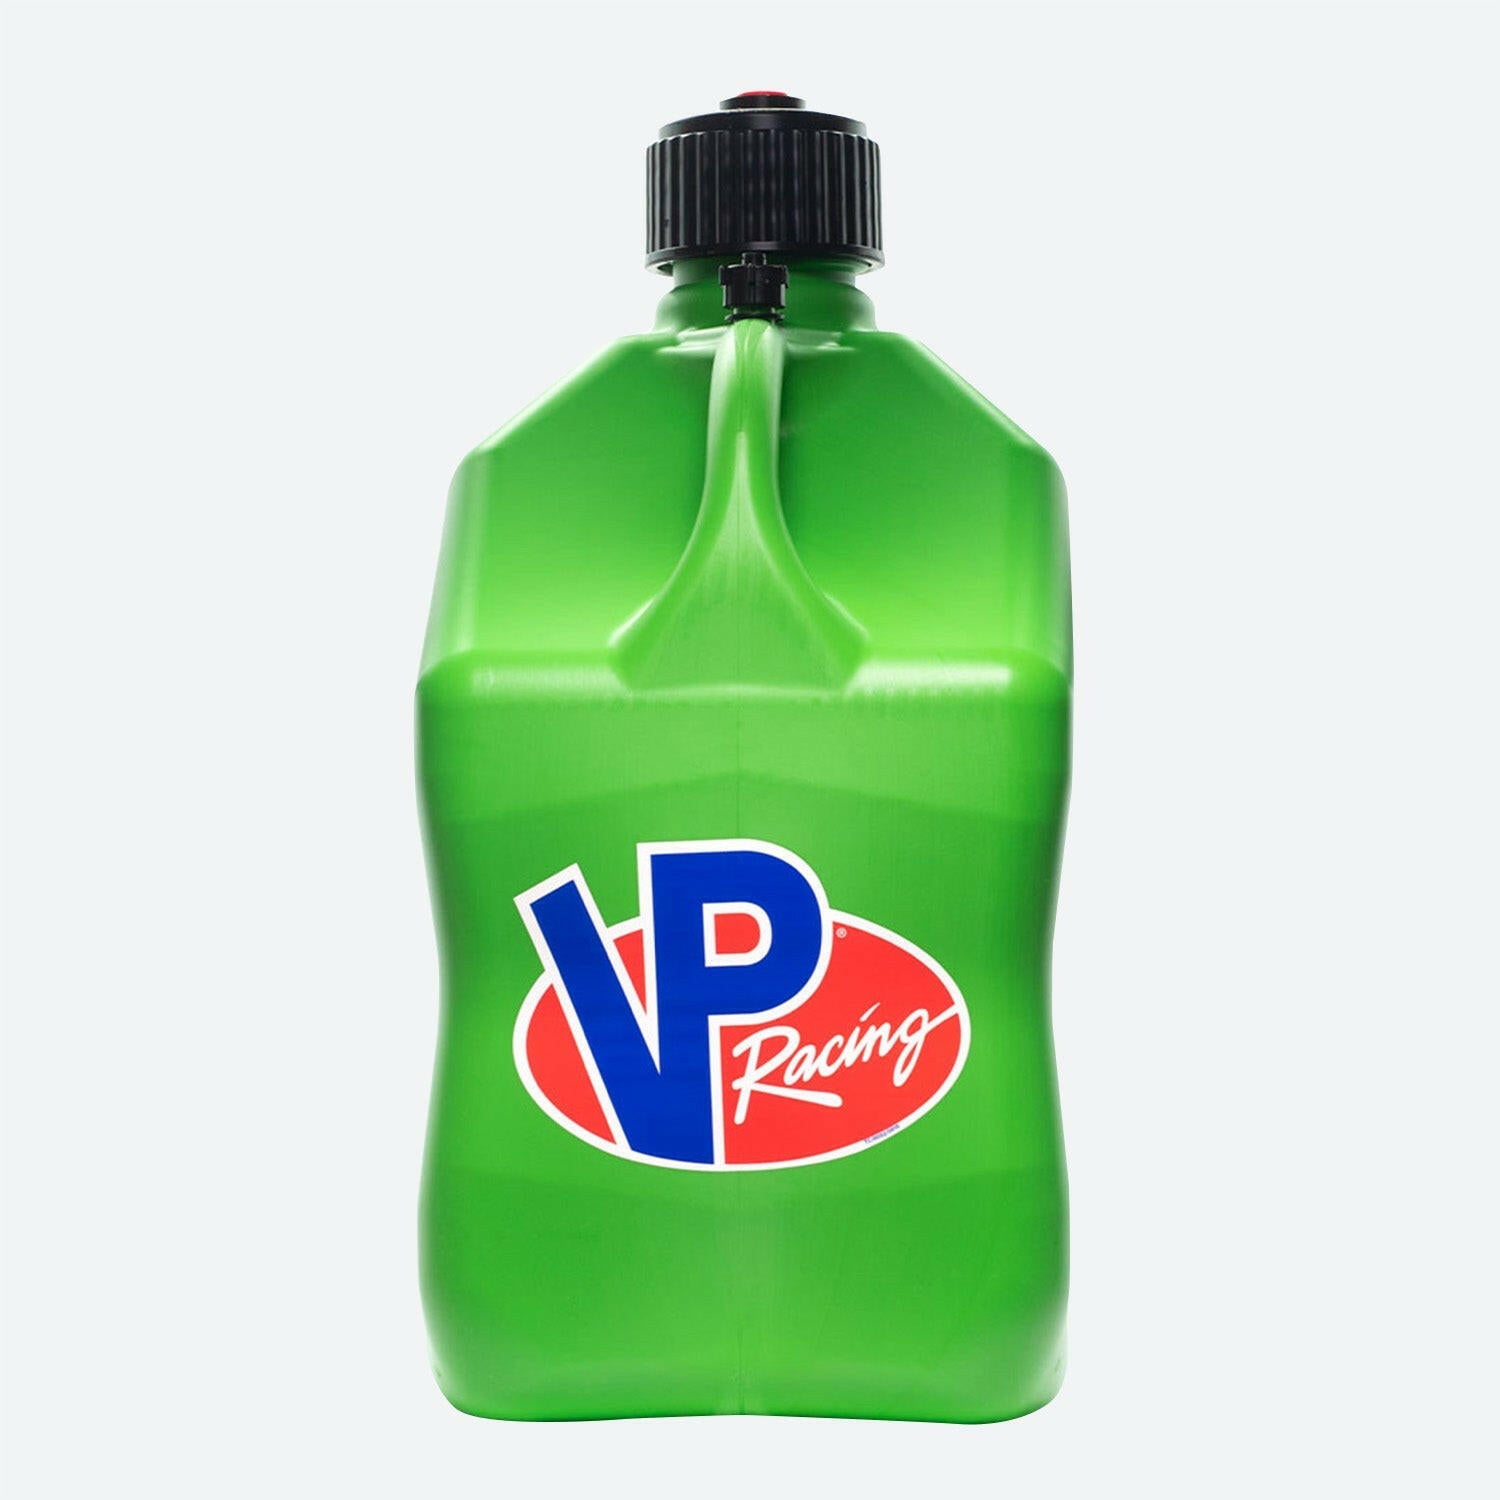 A large green, square 5.5-Gallon Motorsport Container® utility jug with a black cap, featuring the VP Racing logo in blue and red on the front.